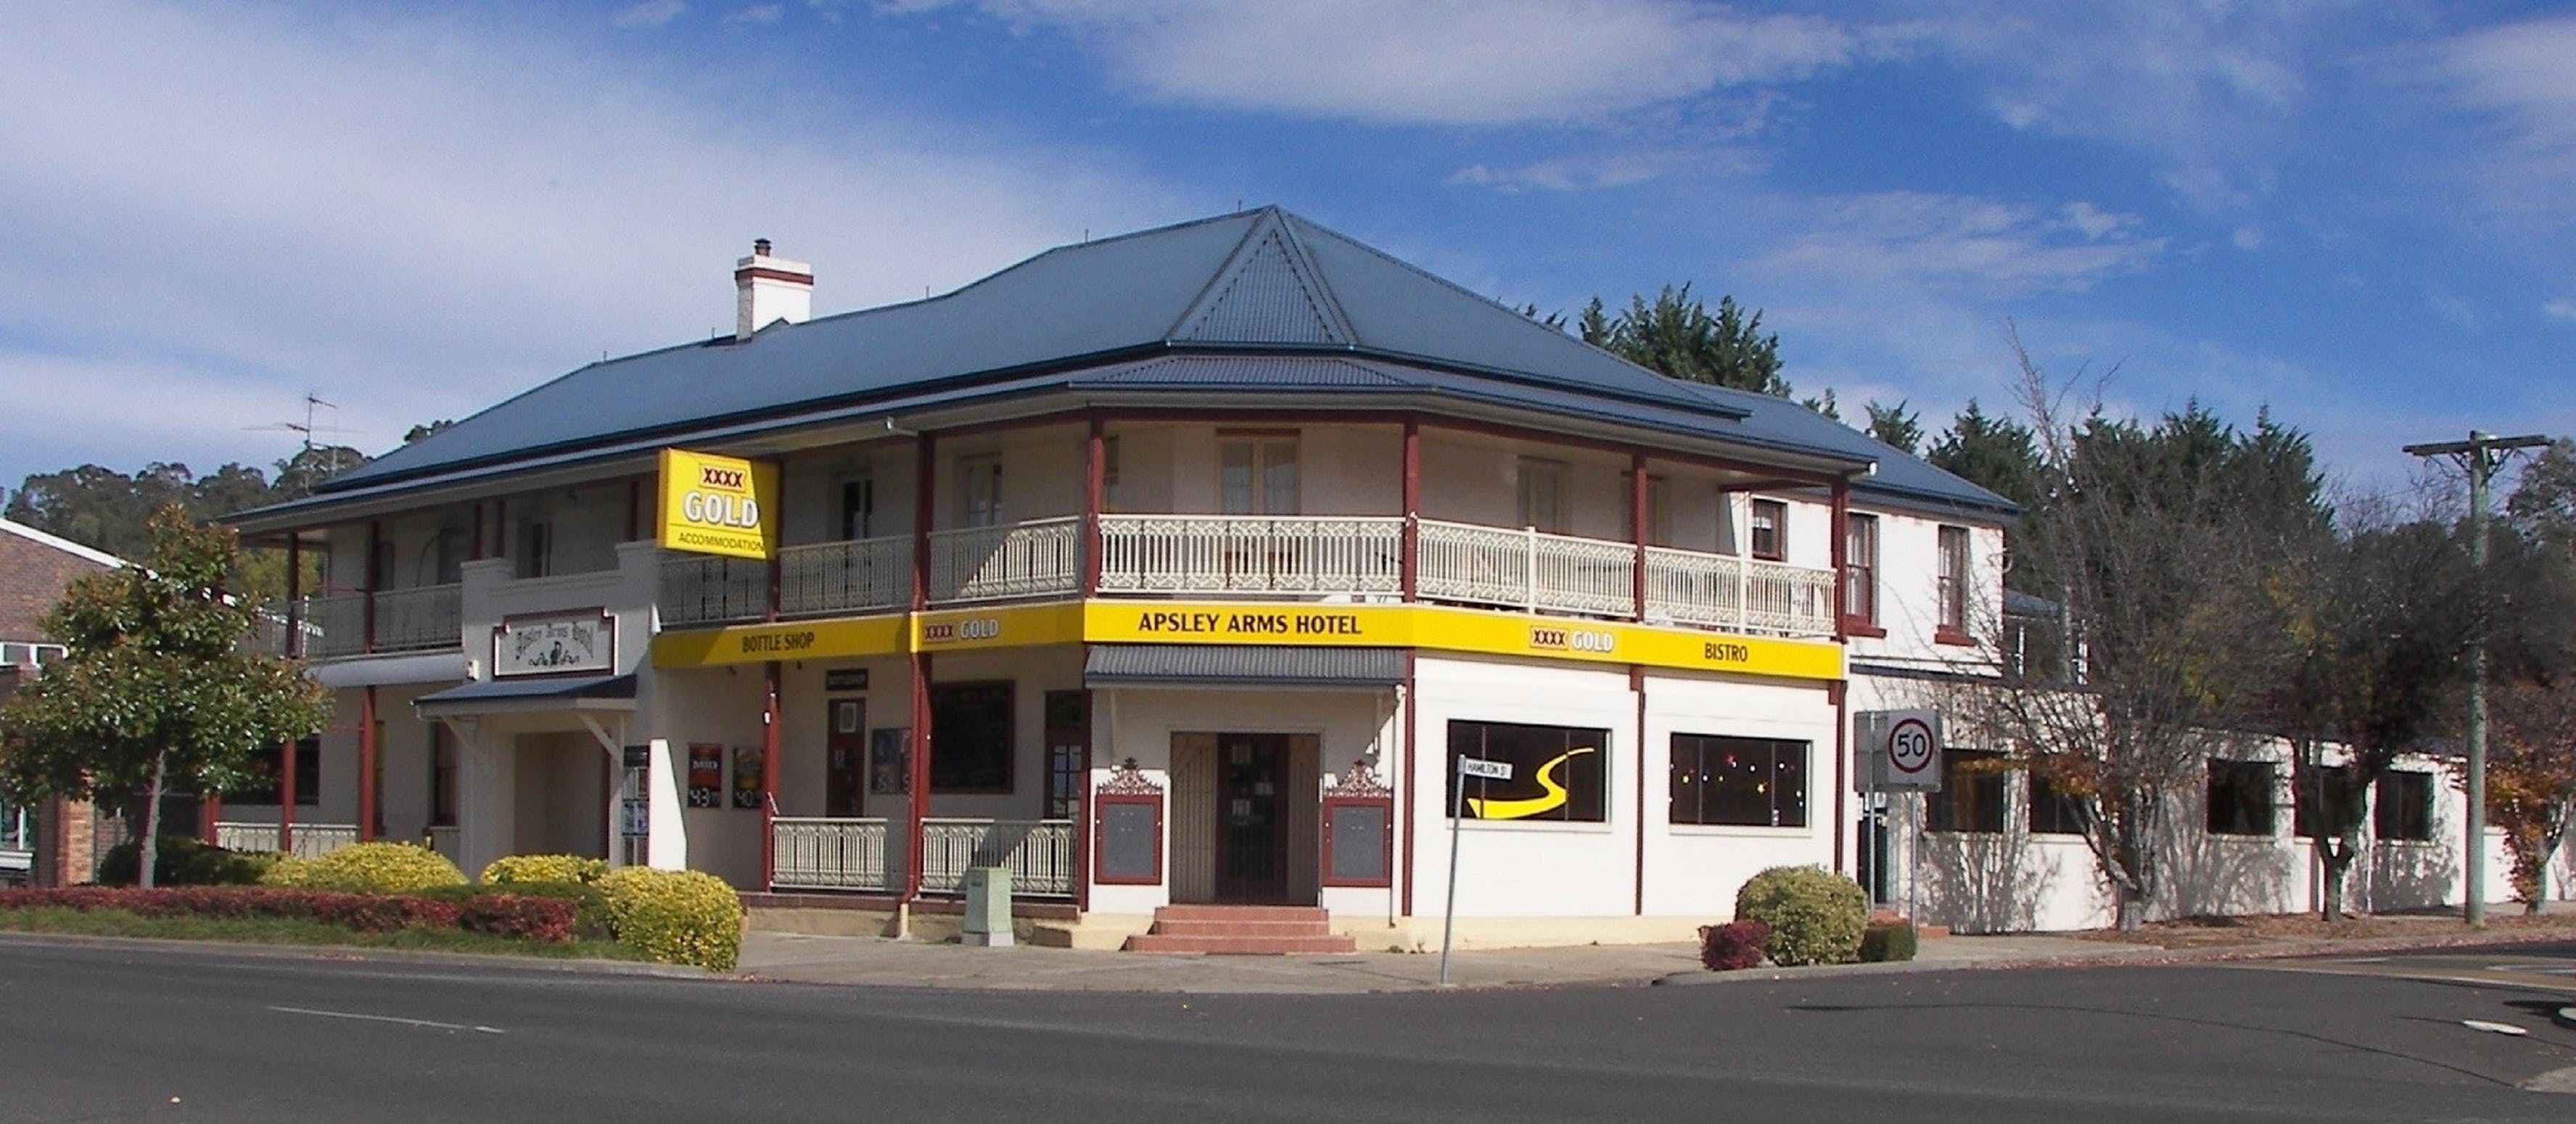 Apsley Arms Hotel - Perisher Accommodation